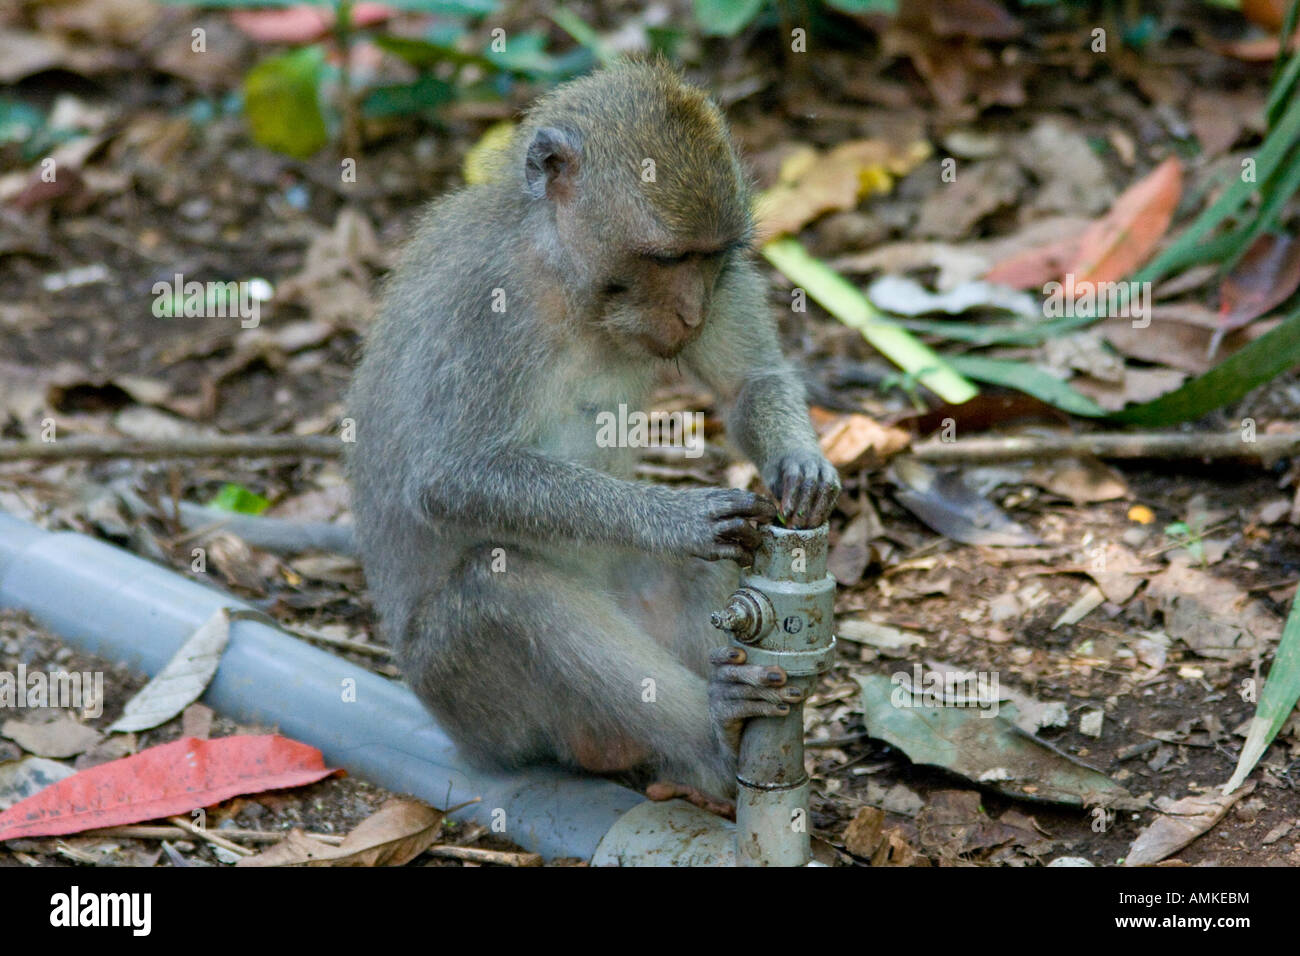 Playing with Water Pipe Long Tailed Macaques Macaca Fascicularis Monkey Forest Ubud Bali Indonesia Stock Photo